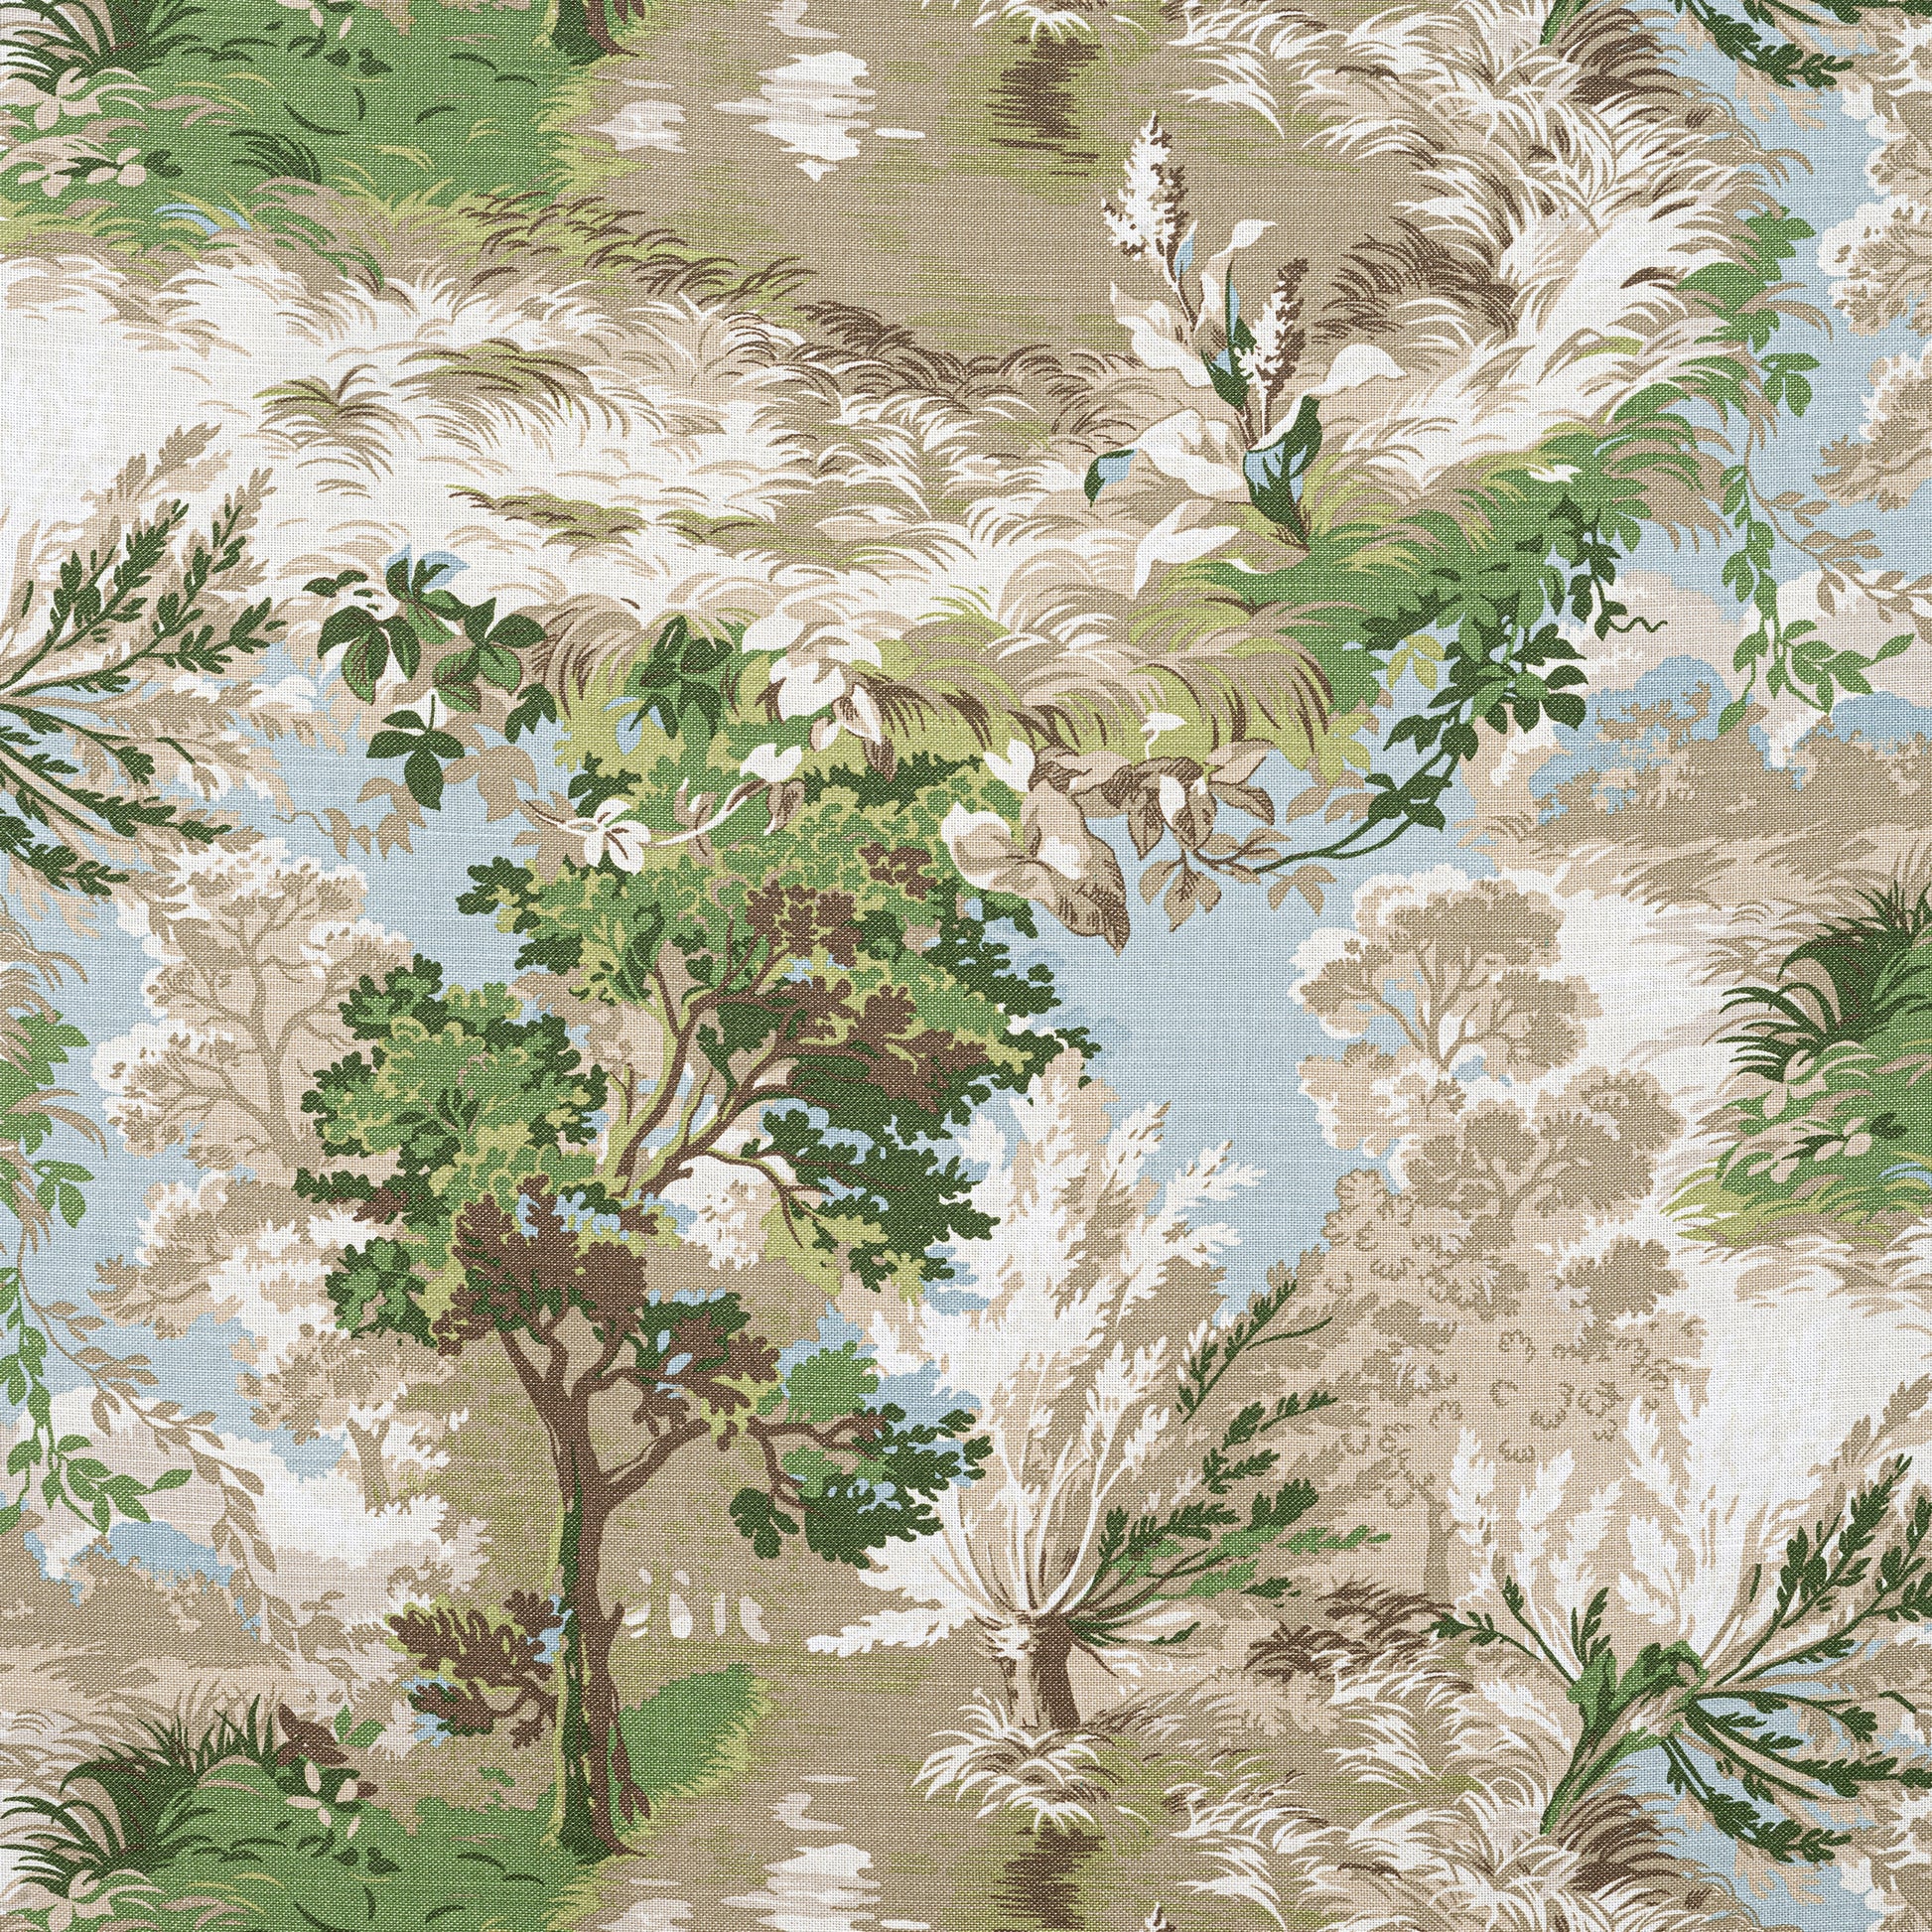 Buy samples of F910866 Lincoln Toile Printed Heritage Thibaut Fabrics